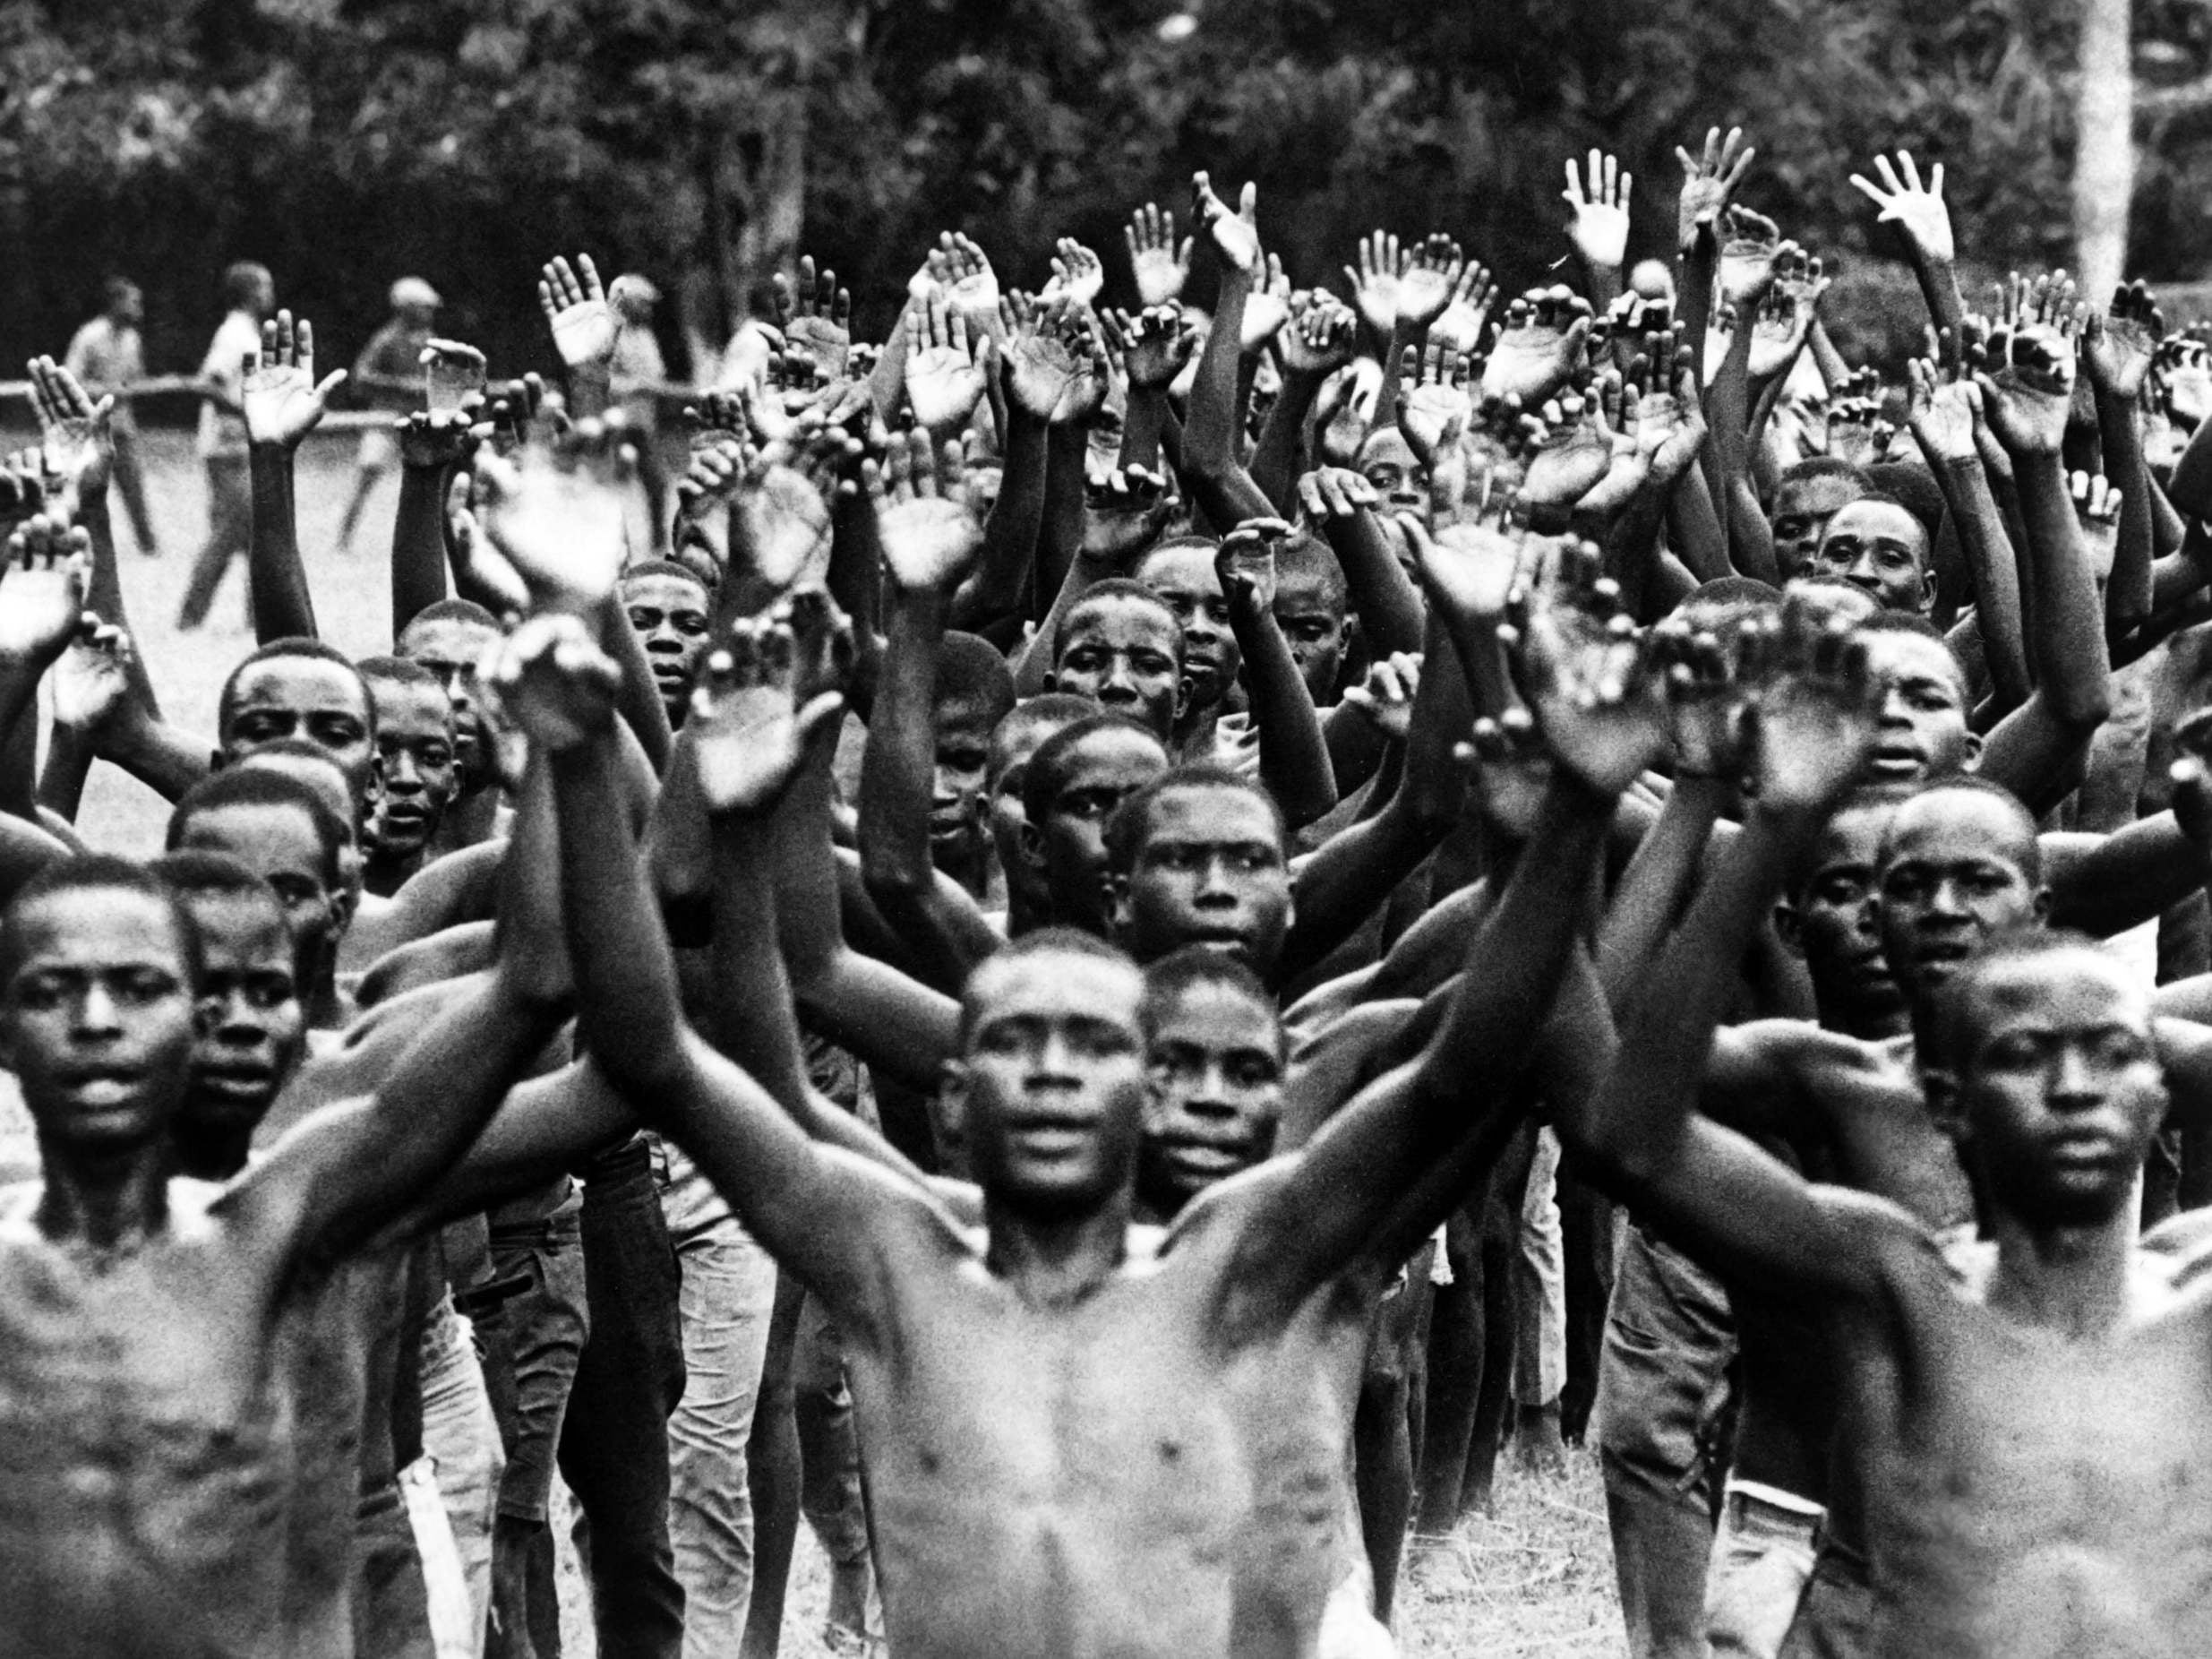 The Biafra war was fought to counter the secession of Biafra from Nigeria